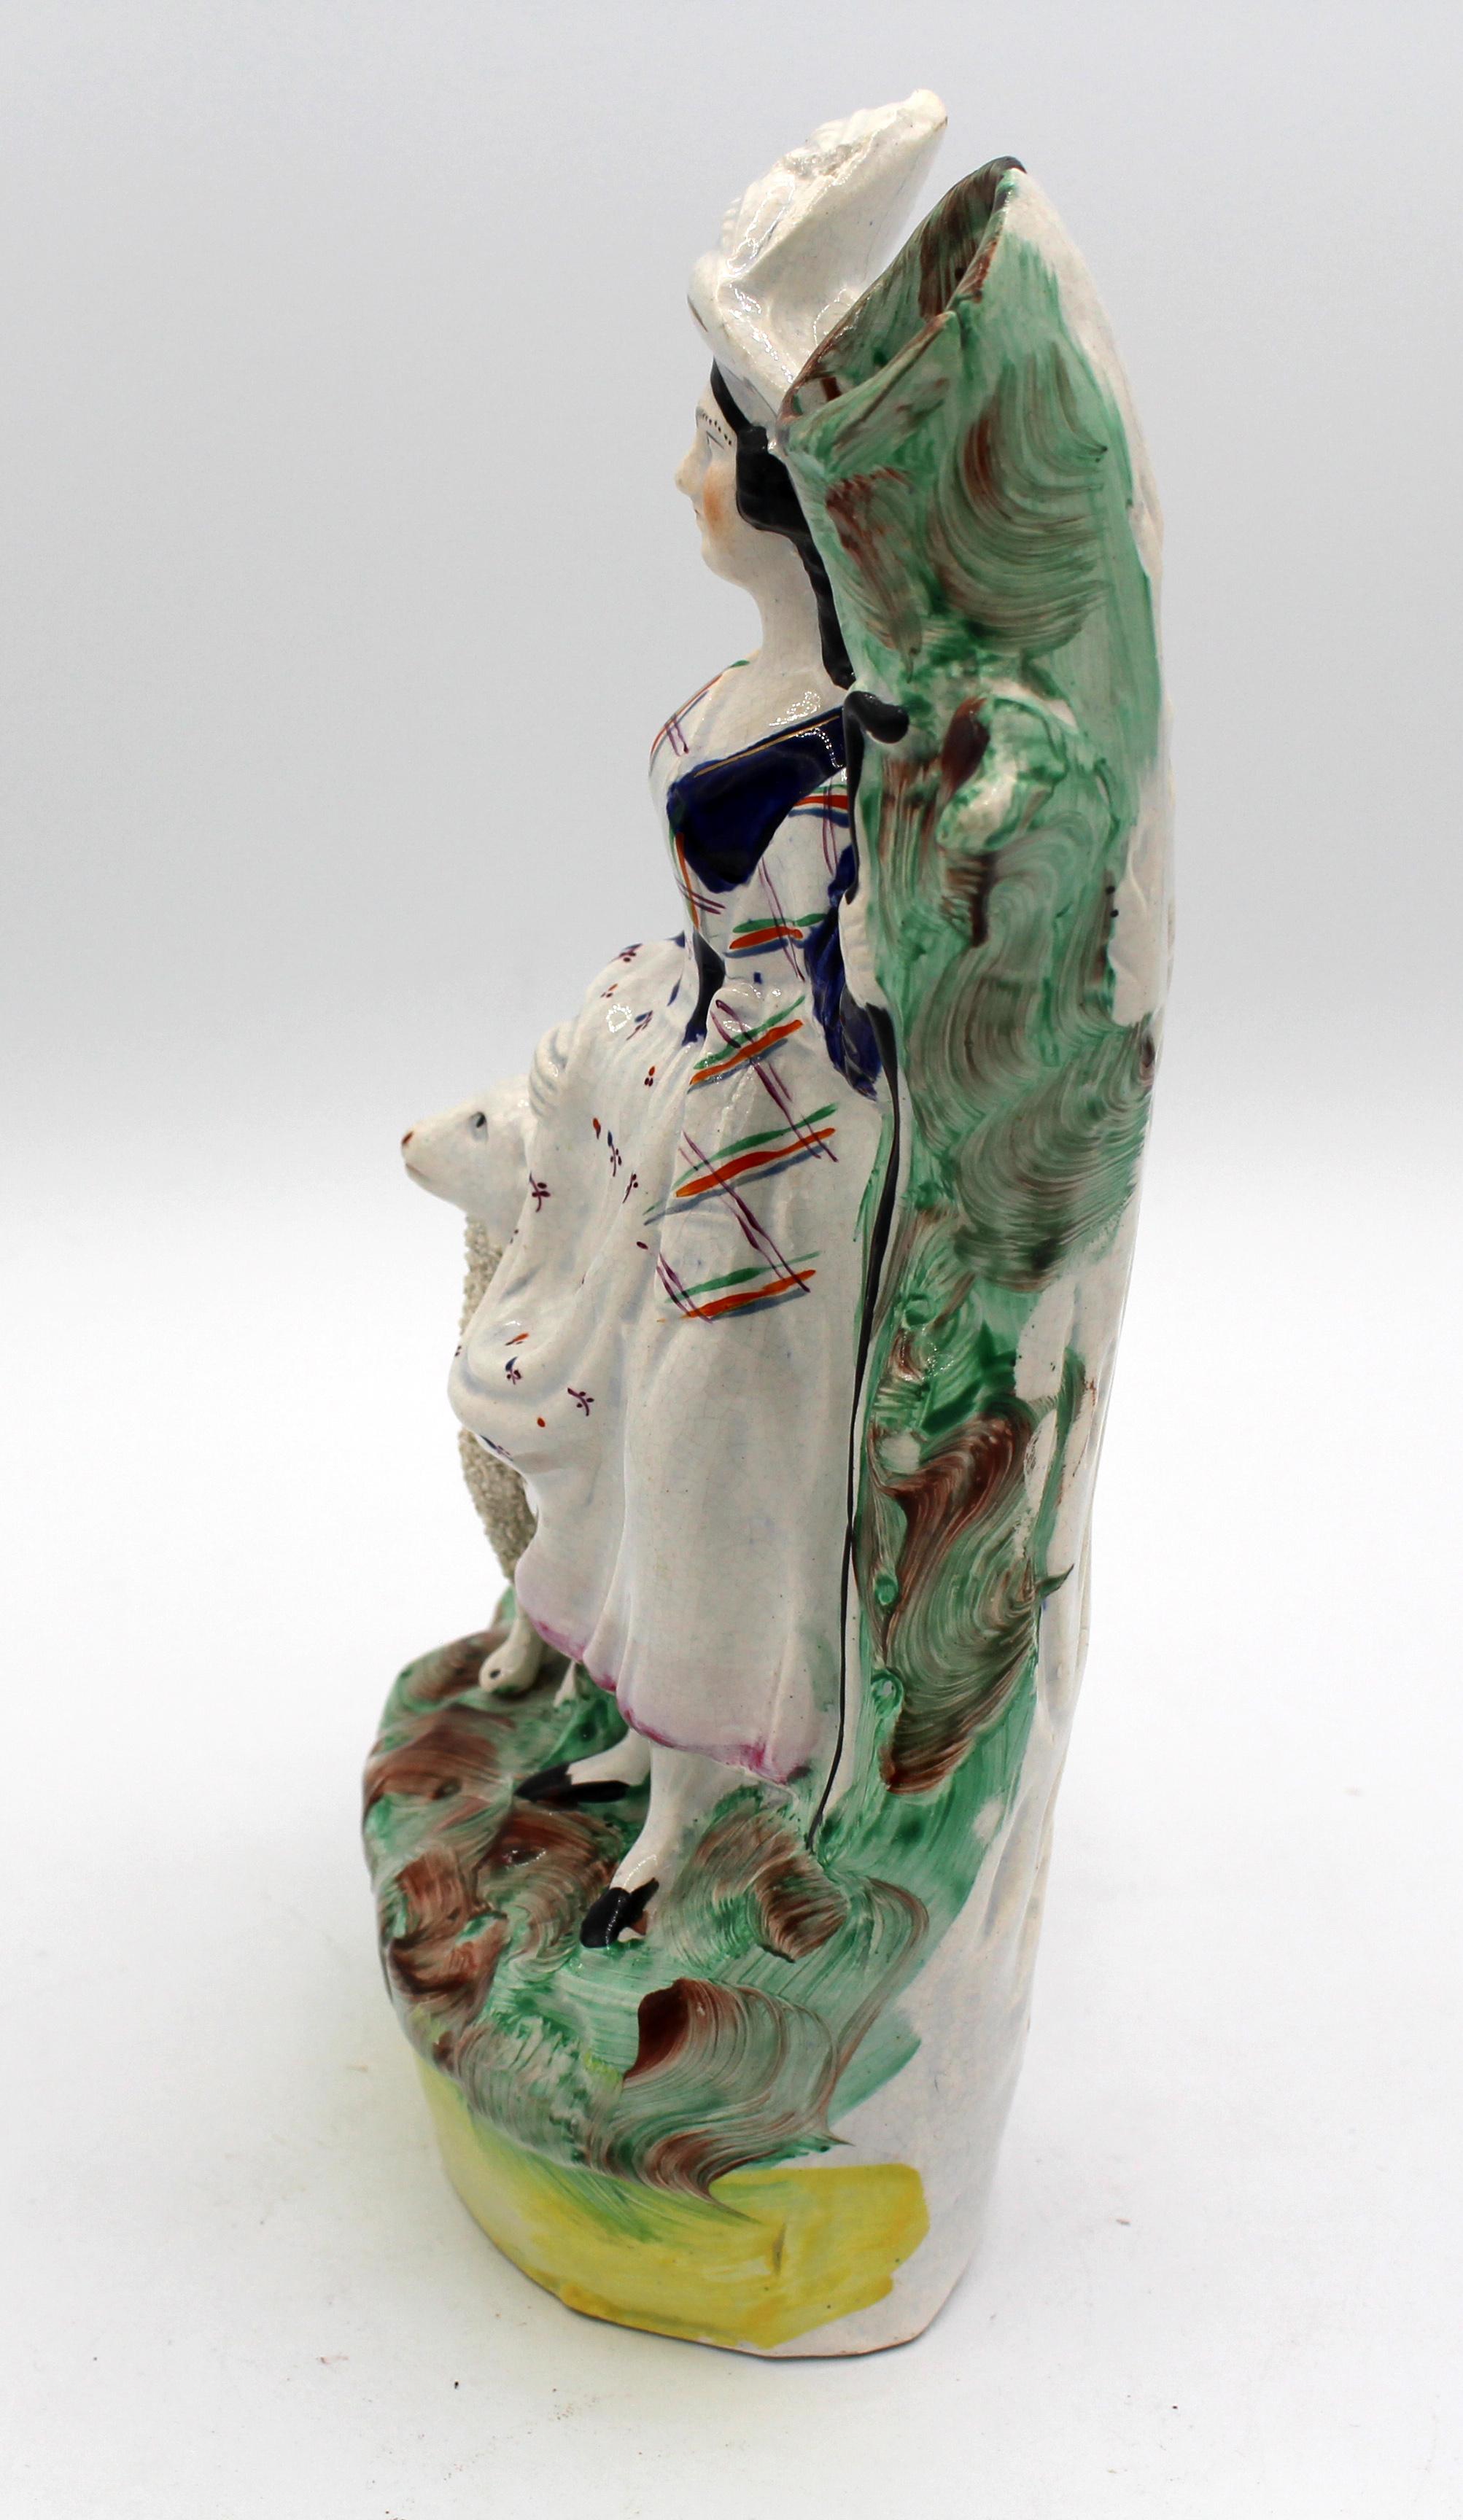 circa 1860-80 English Staffordshire spill vase, a shepherdess. Note the gentle crazing & blue tones in crevices of her dress. Possible lip restoration.
6